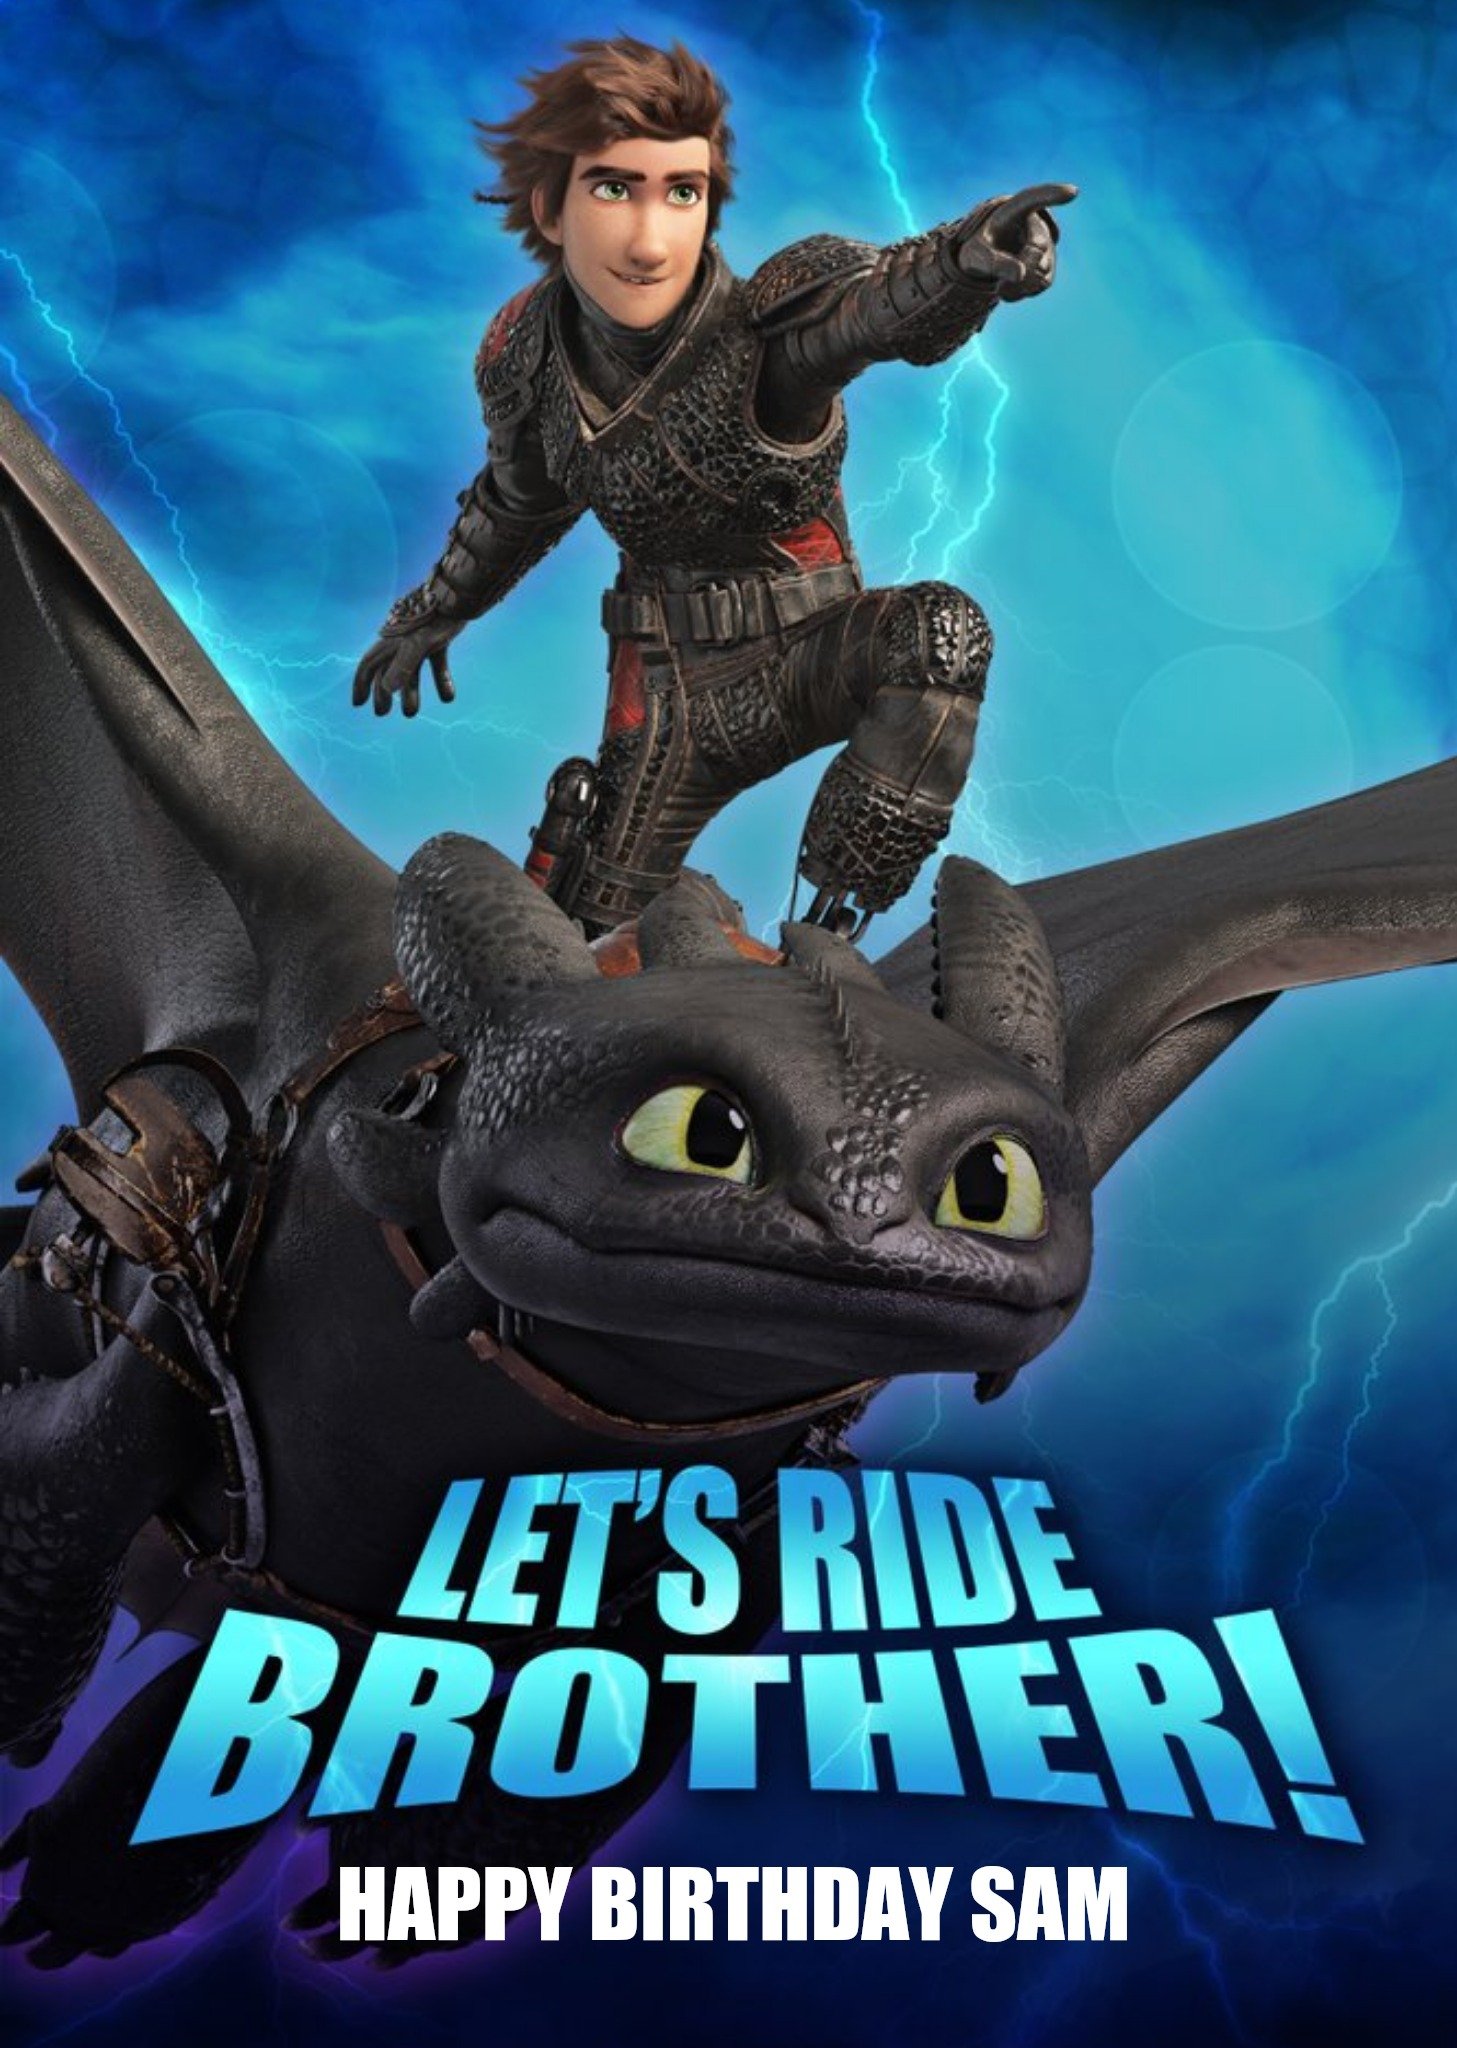 Let's Ride Brother - How To Train Your Dragon Birthday Card, Large